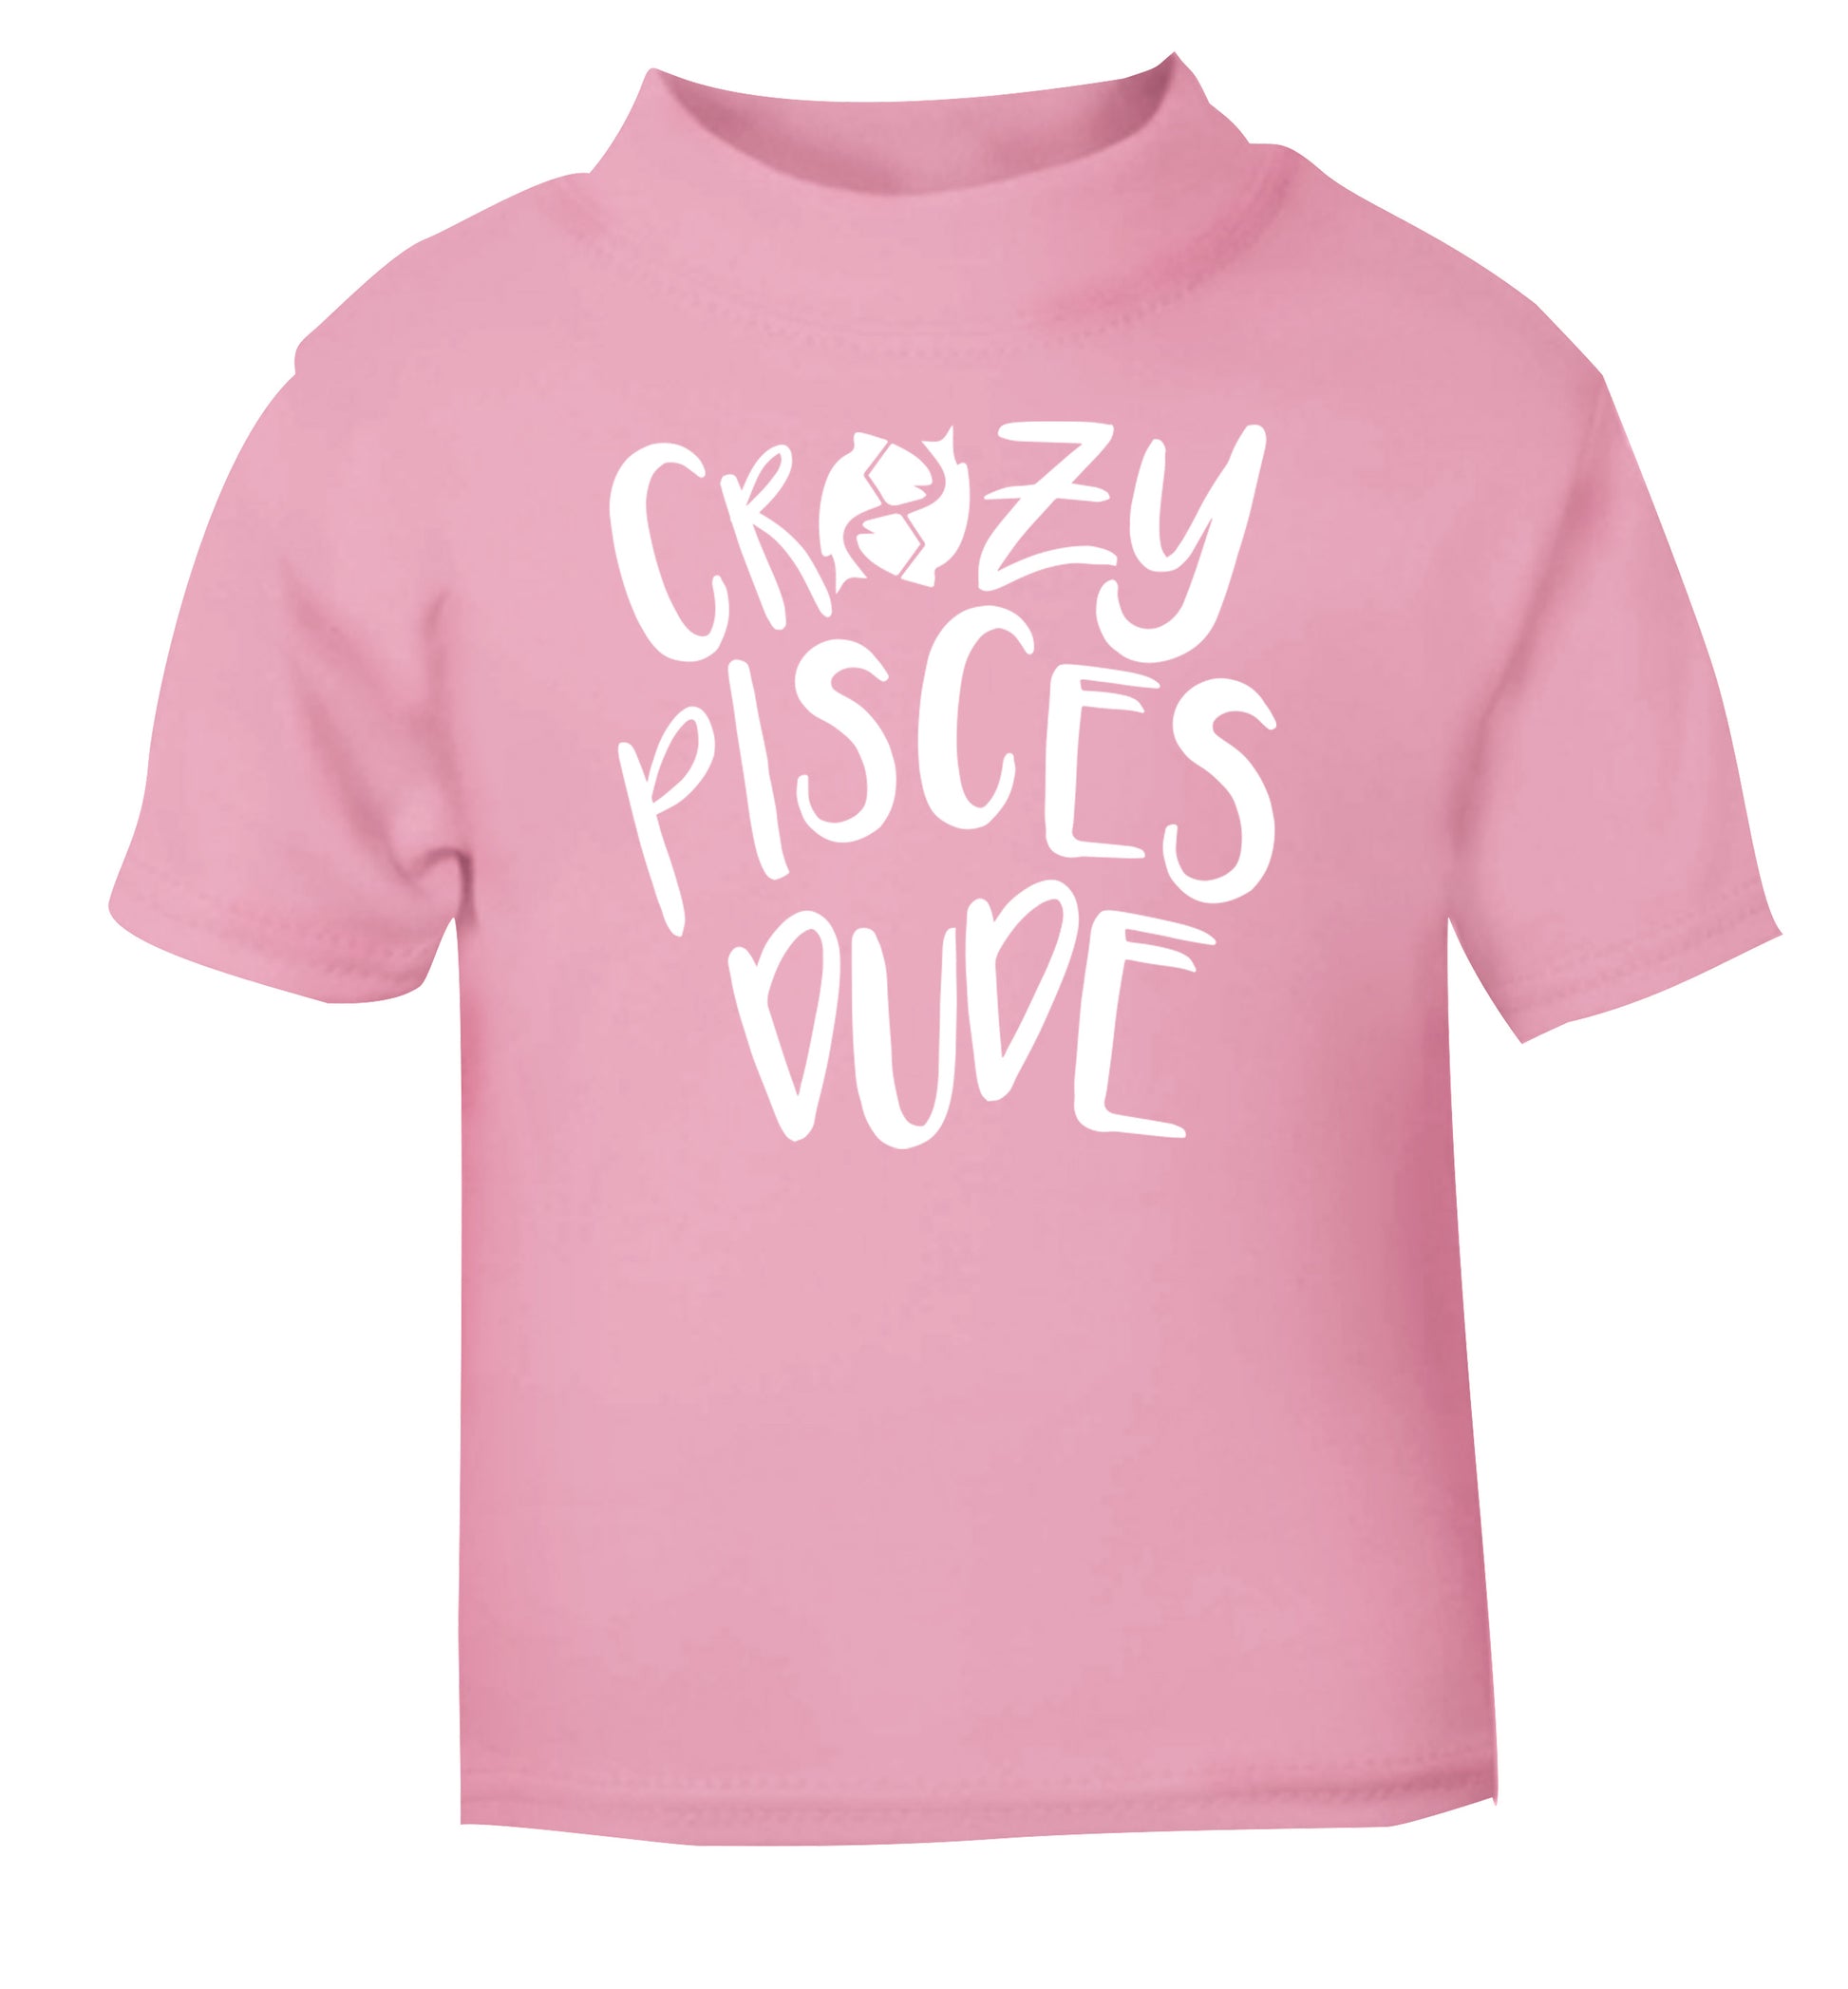 Crazy pisces dude light pink Baby Toddler Tshirt 2 Years